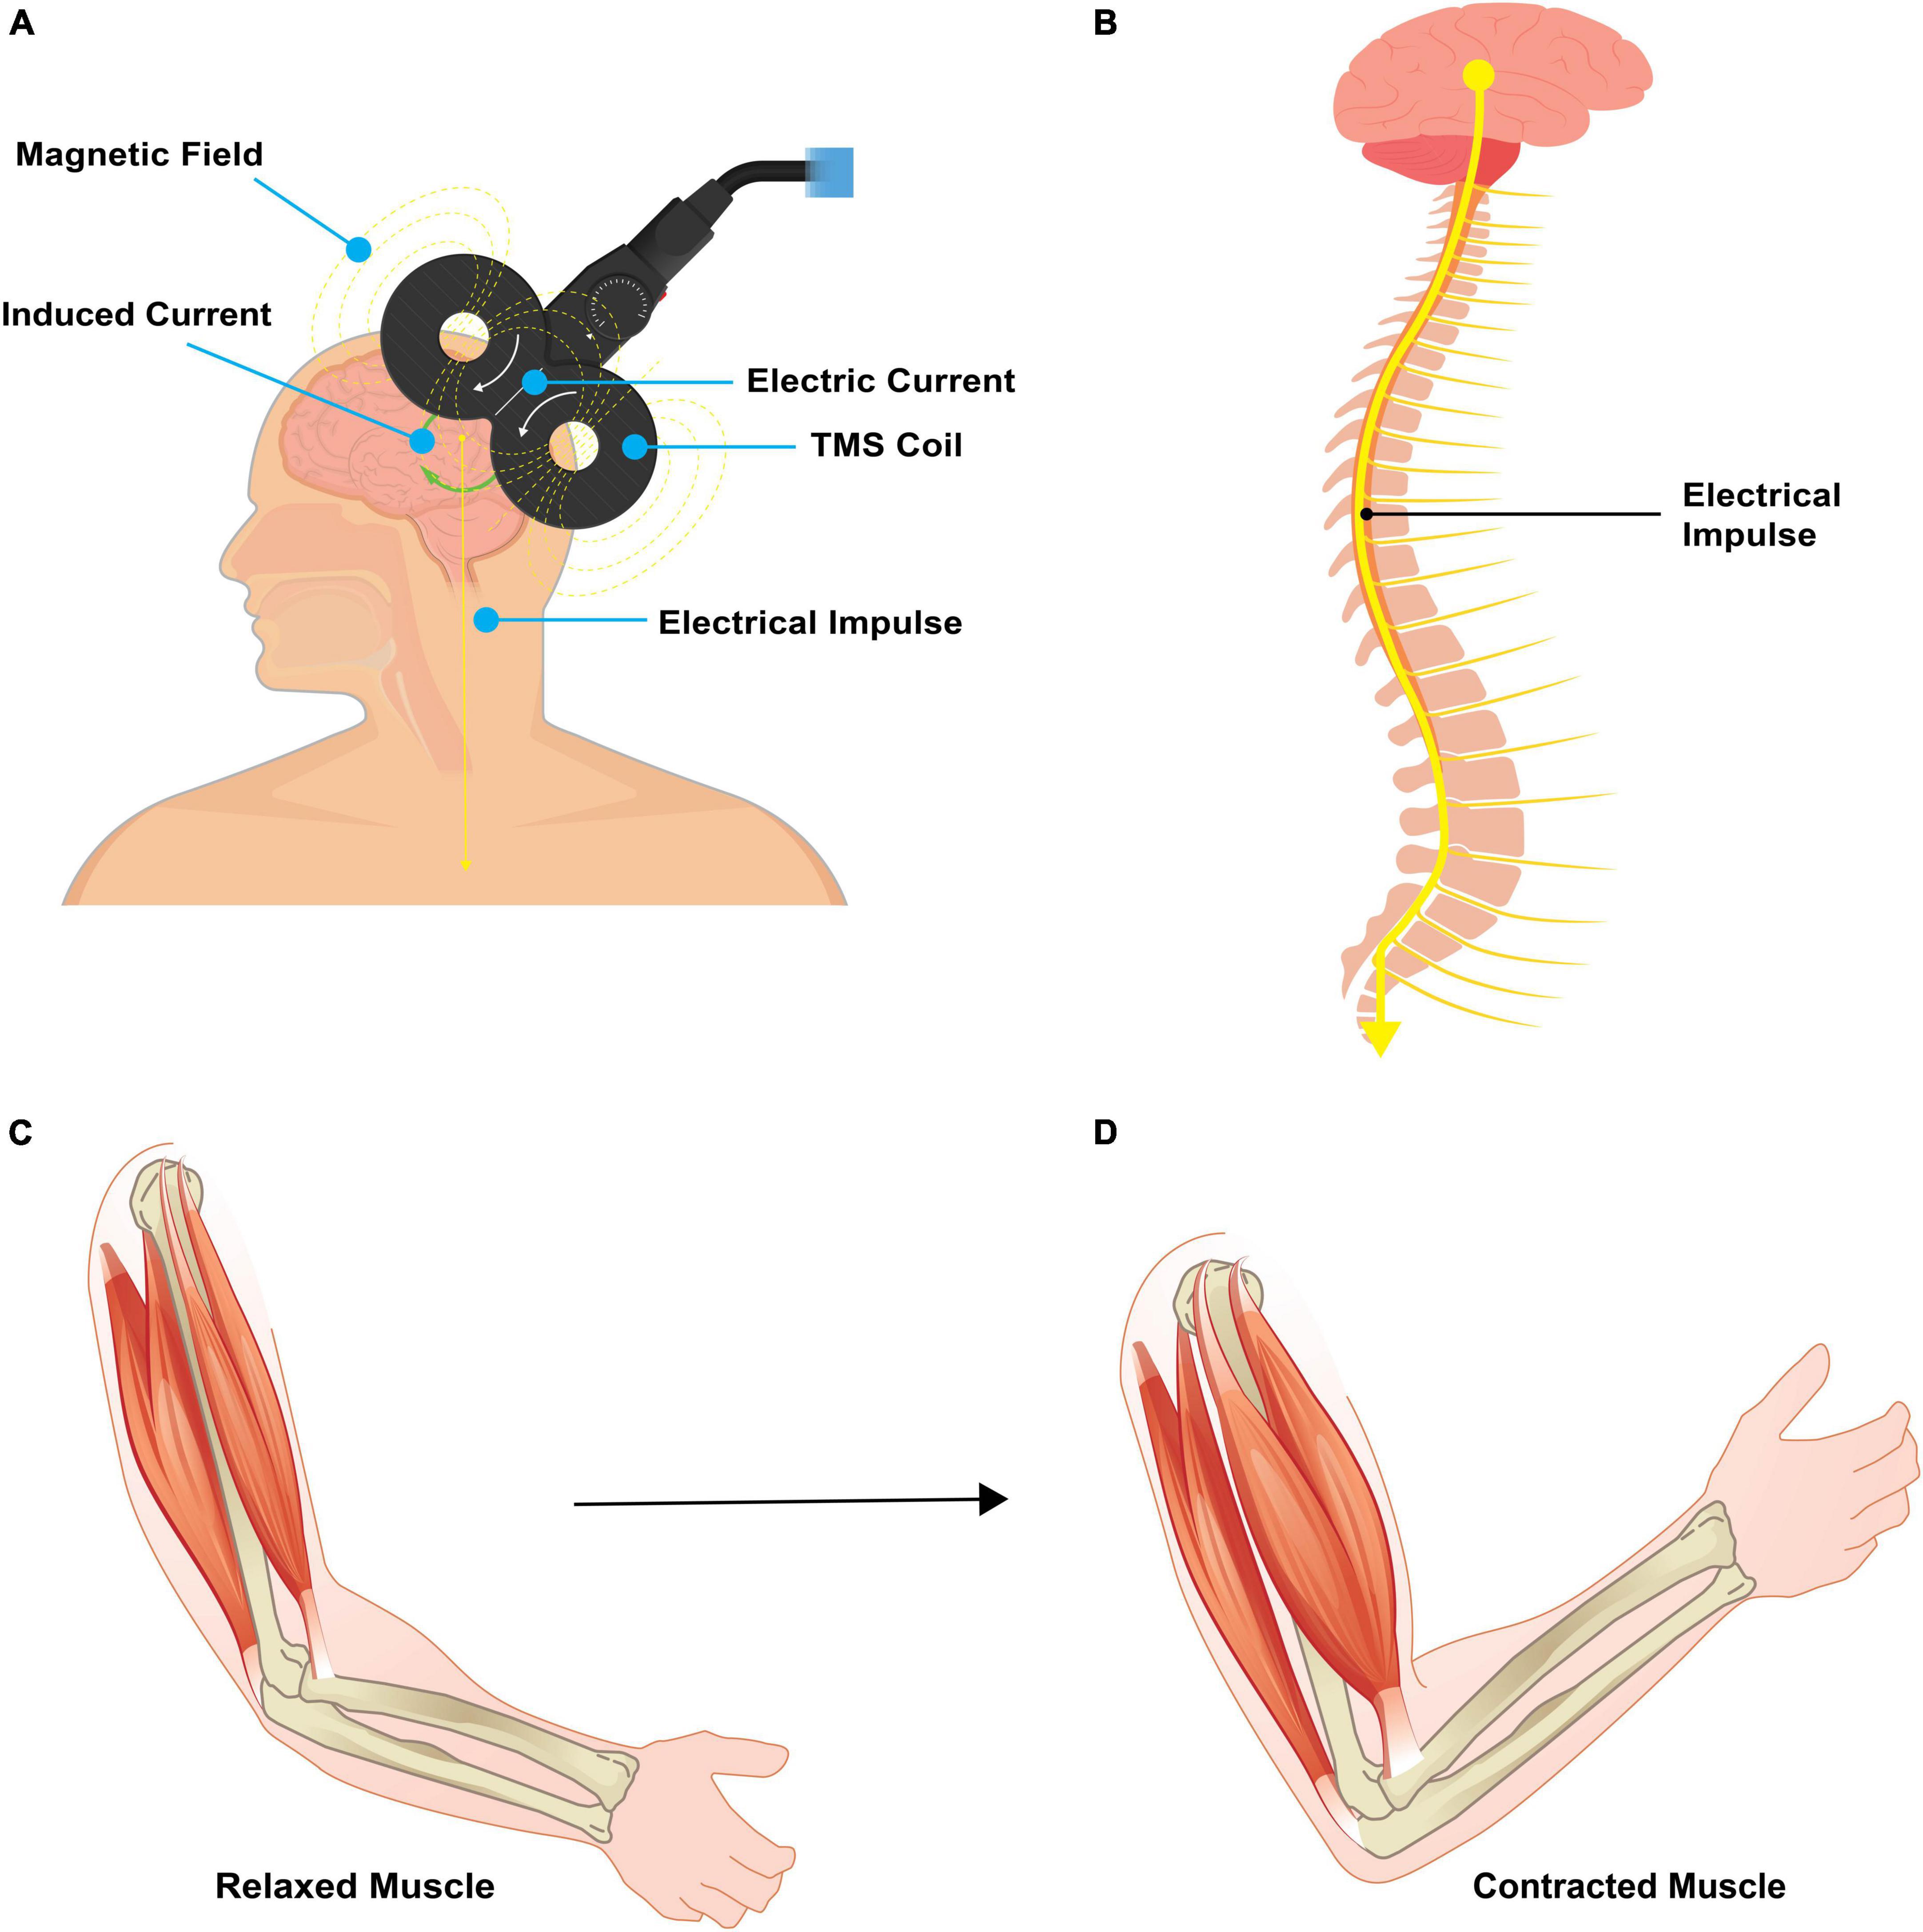 Neuromuscular electrical stimulation‐promoted plasticity of the human brain  - Carson - 2021 - The Journal of Physiology - Wiley Online Library